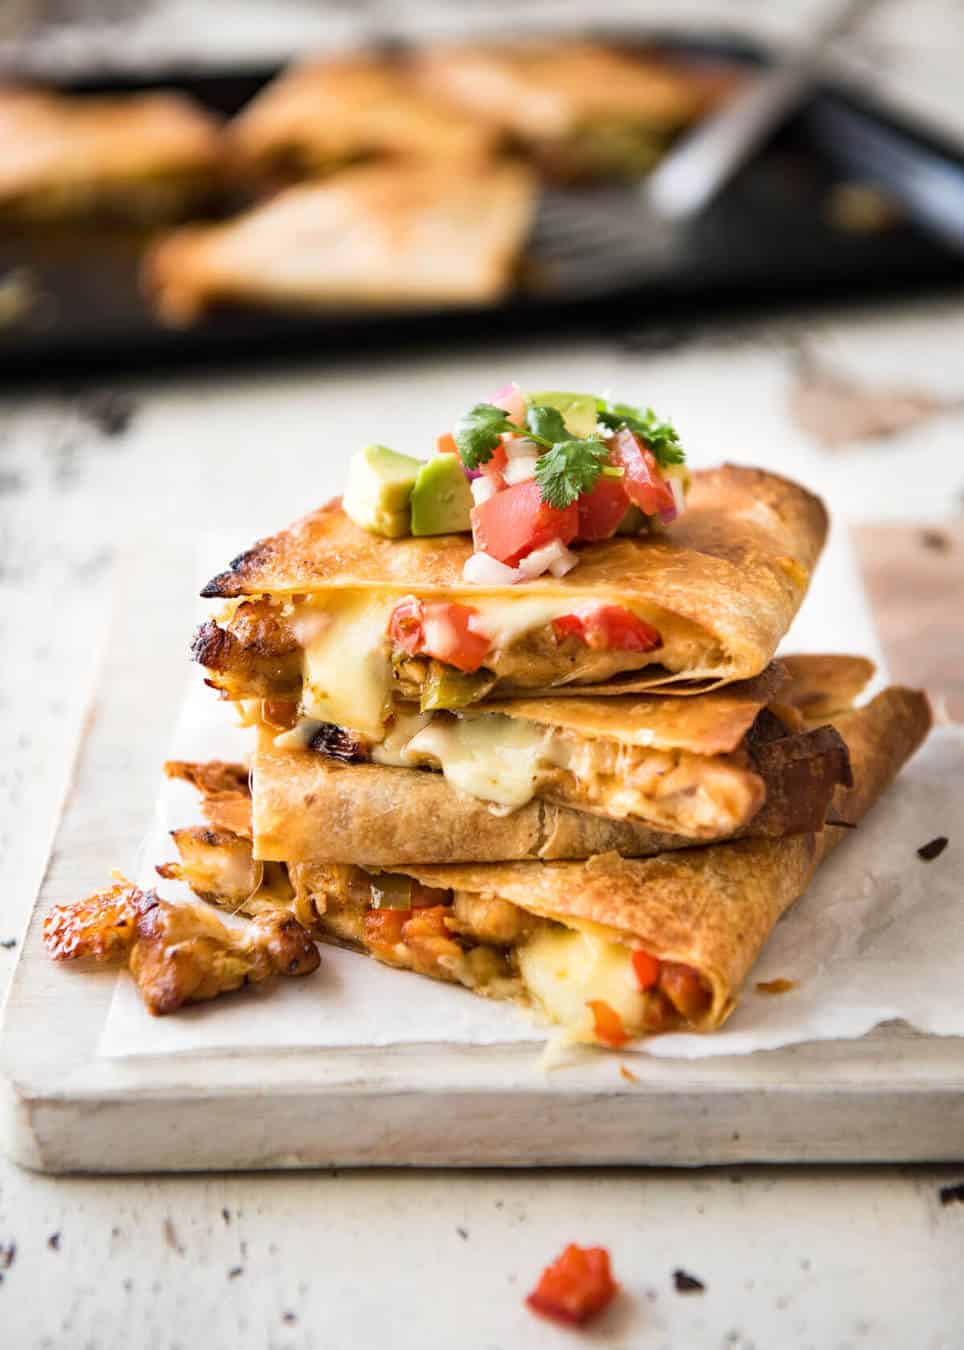 Chicken Quesadillas Recipe: Perfectly Seasoned and Crispy Every Time